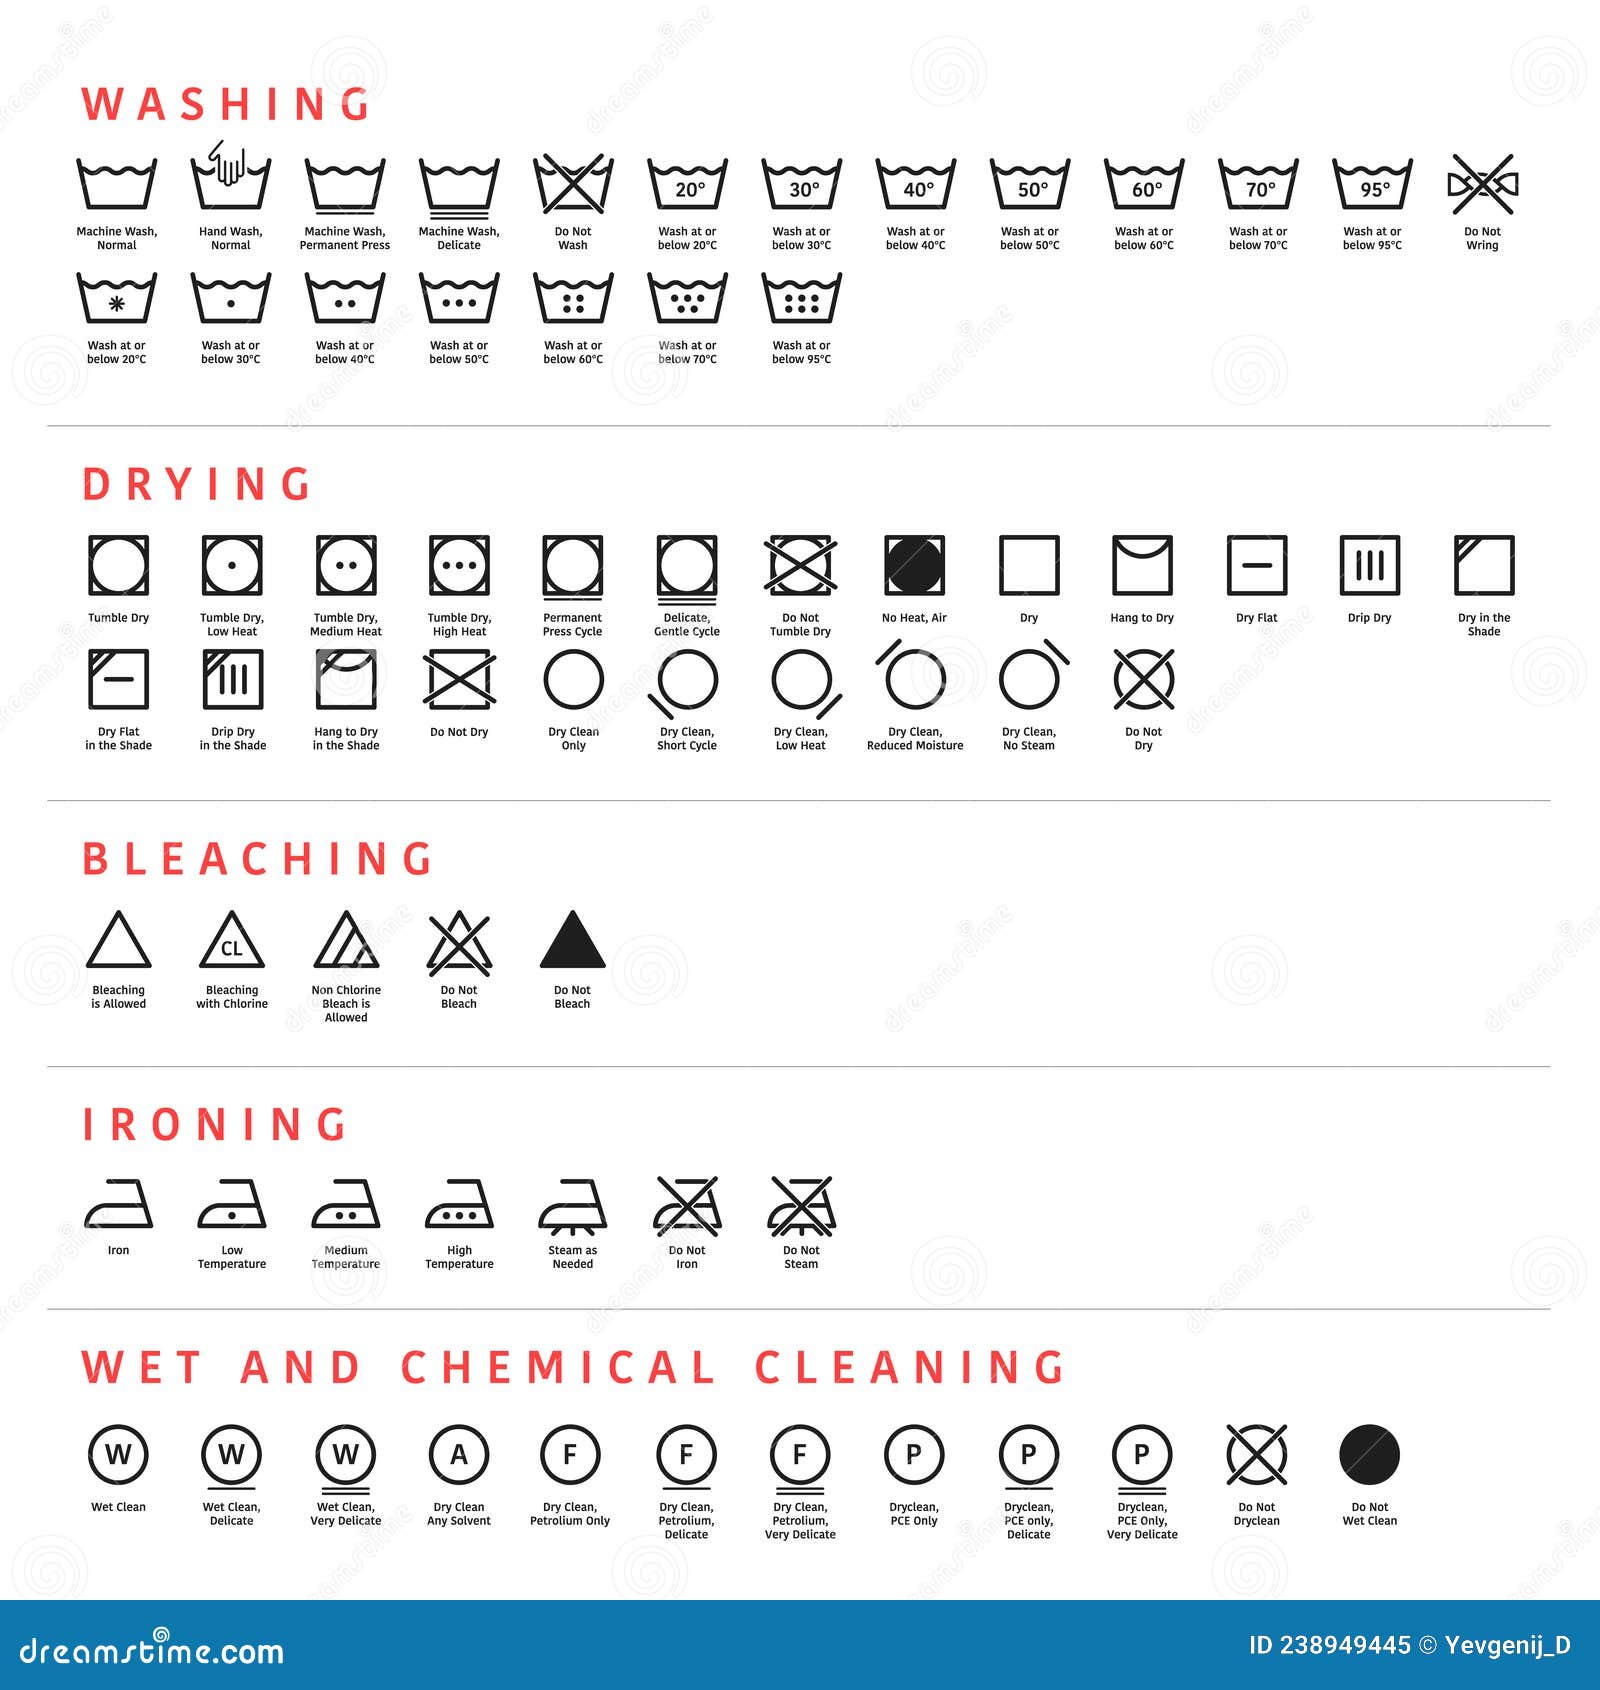 Laundry Guides & Advice